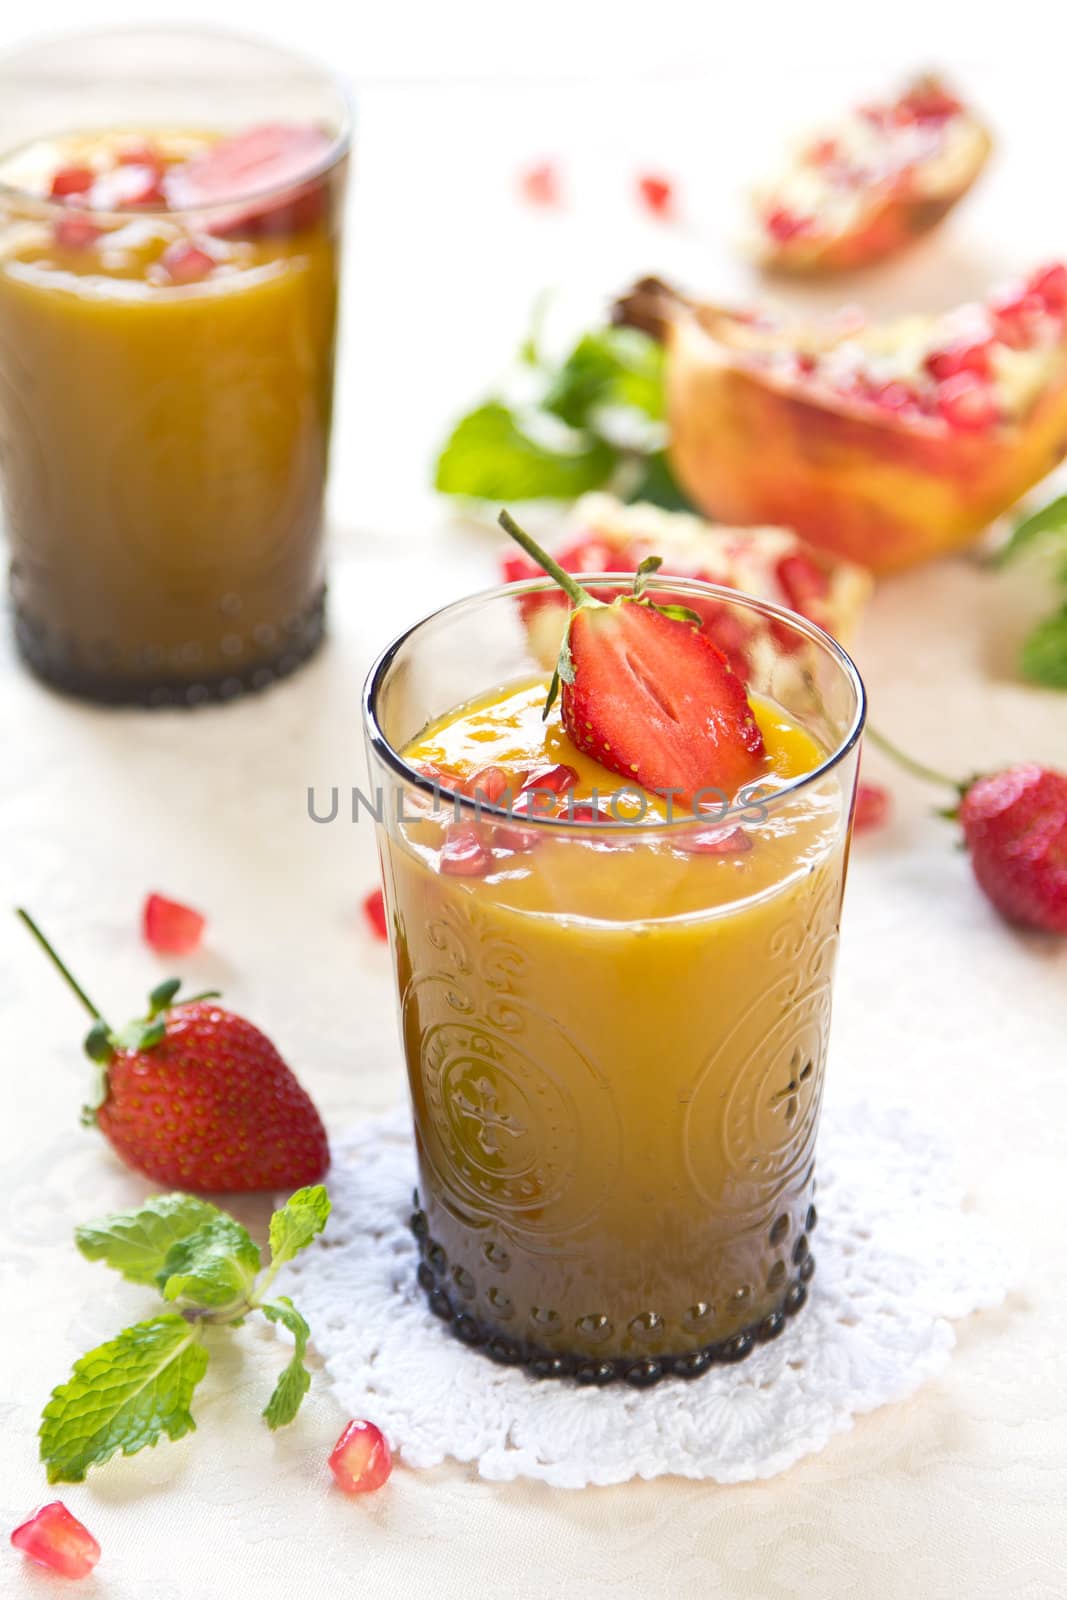 Mango and pineapple smoothie by vanillaechoes